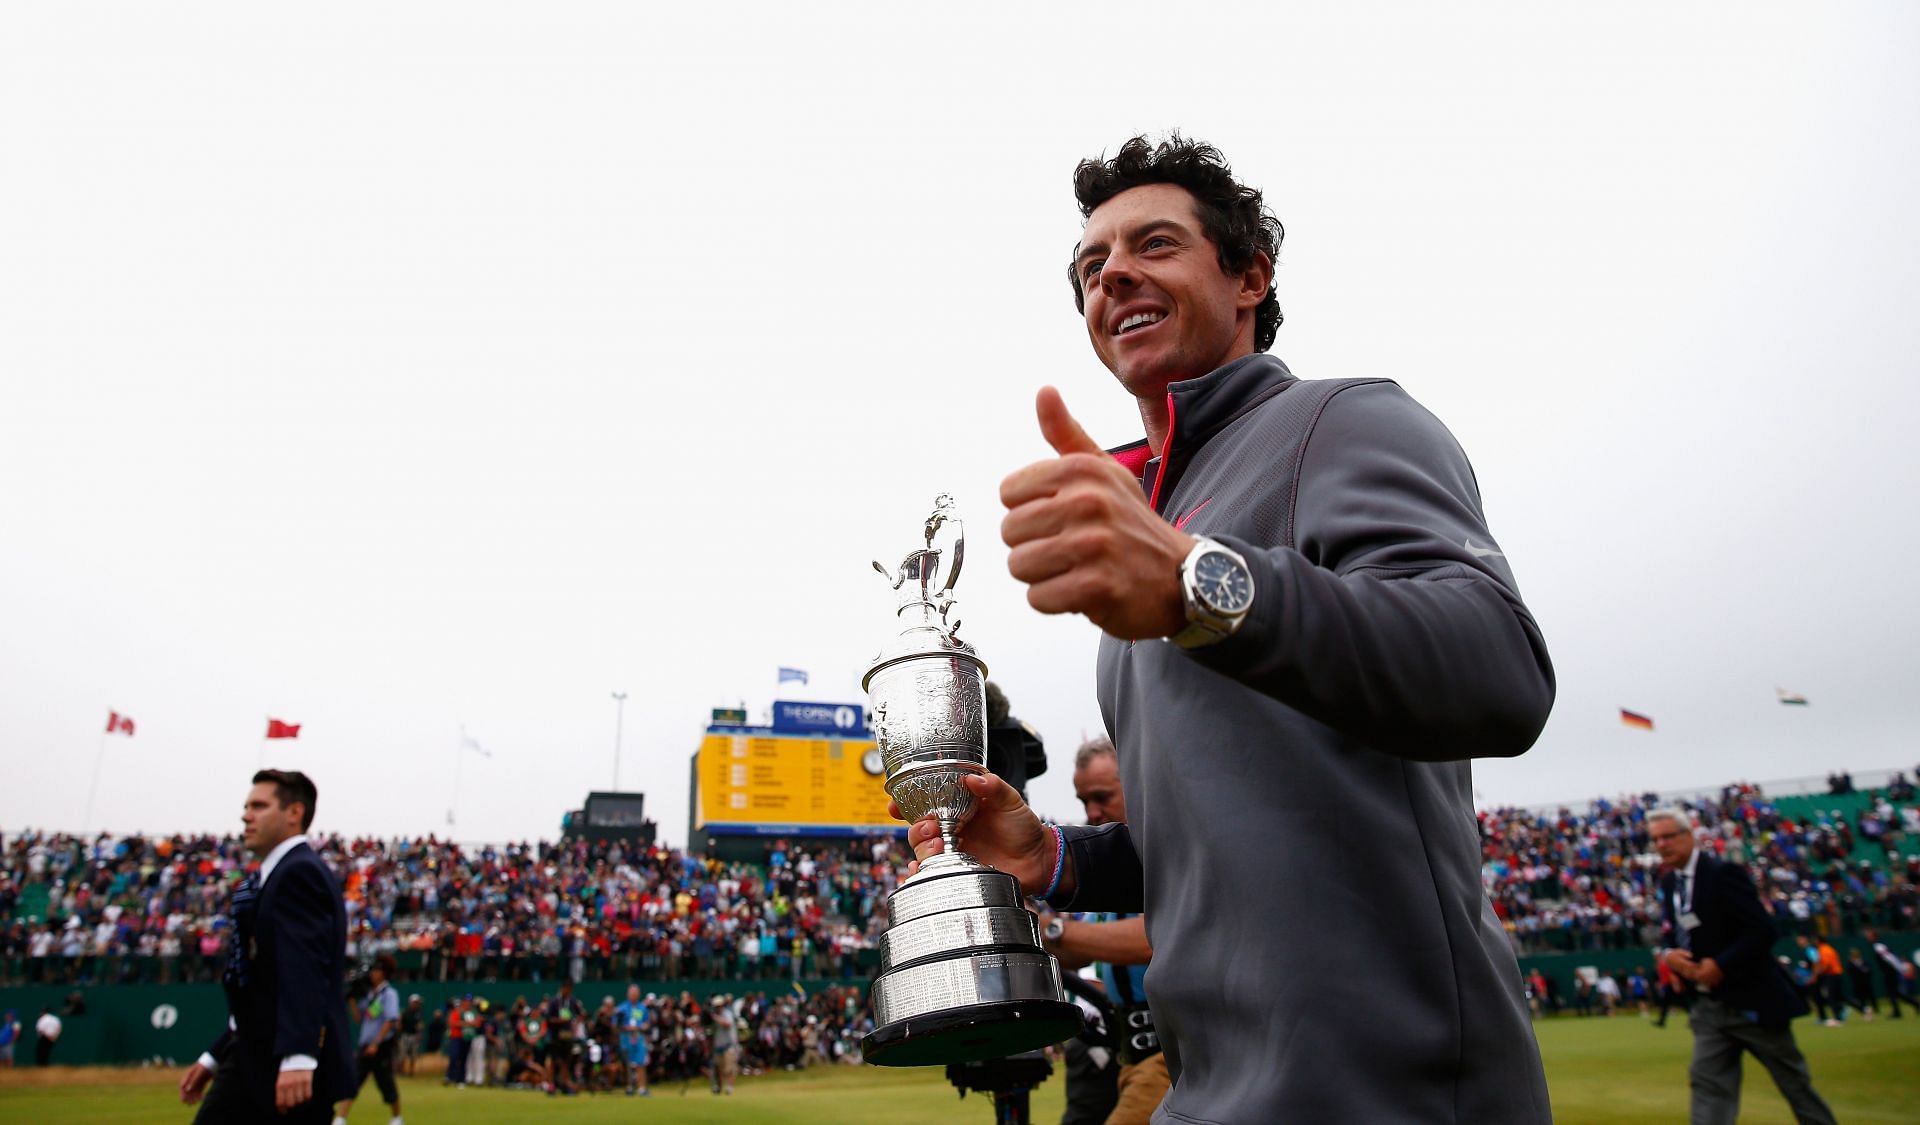 Rory McIlroy in the 143rd Open Championship (via Getty Images)